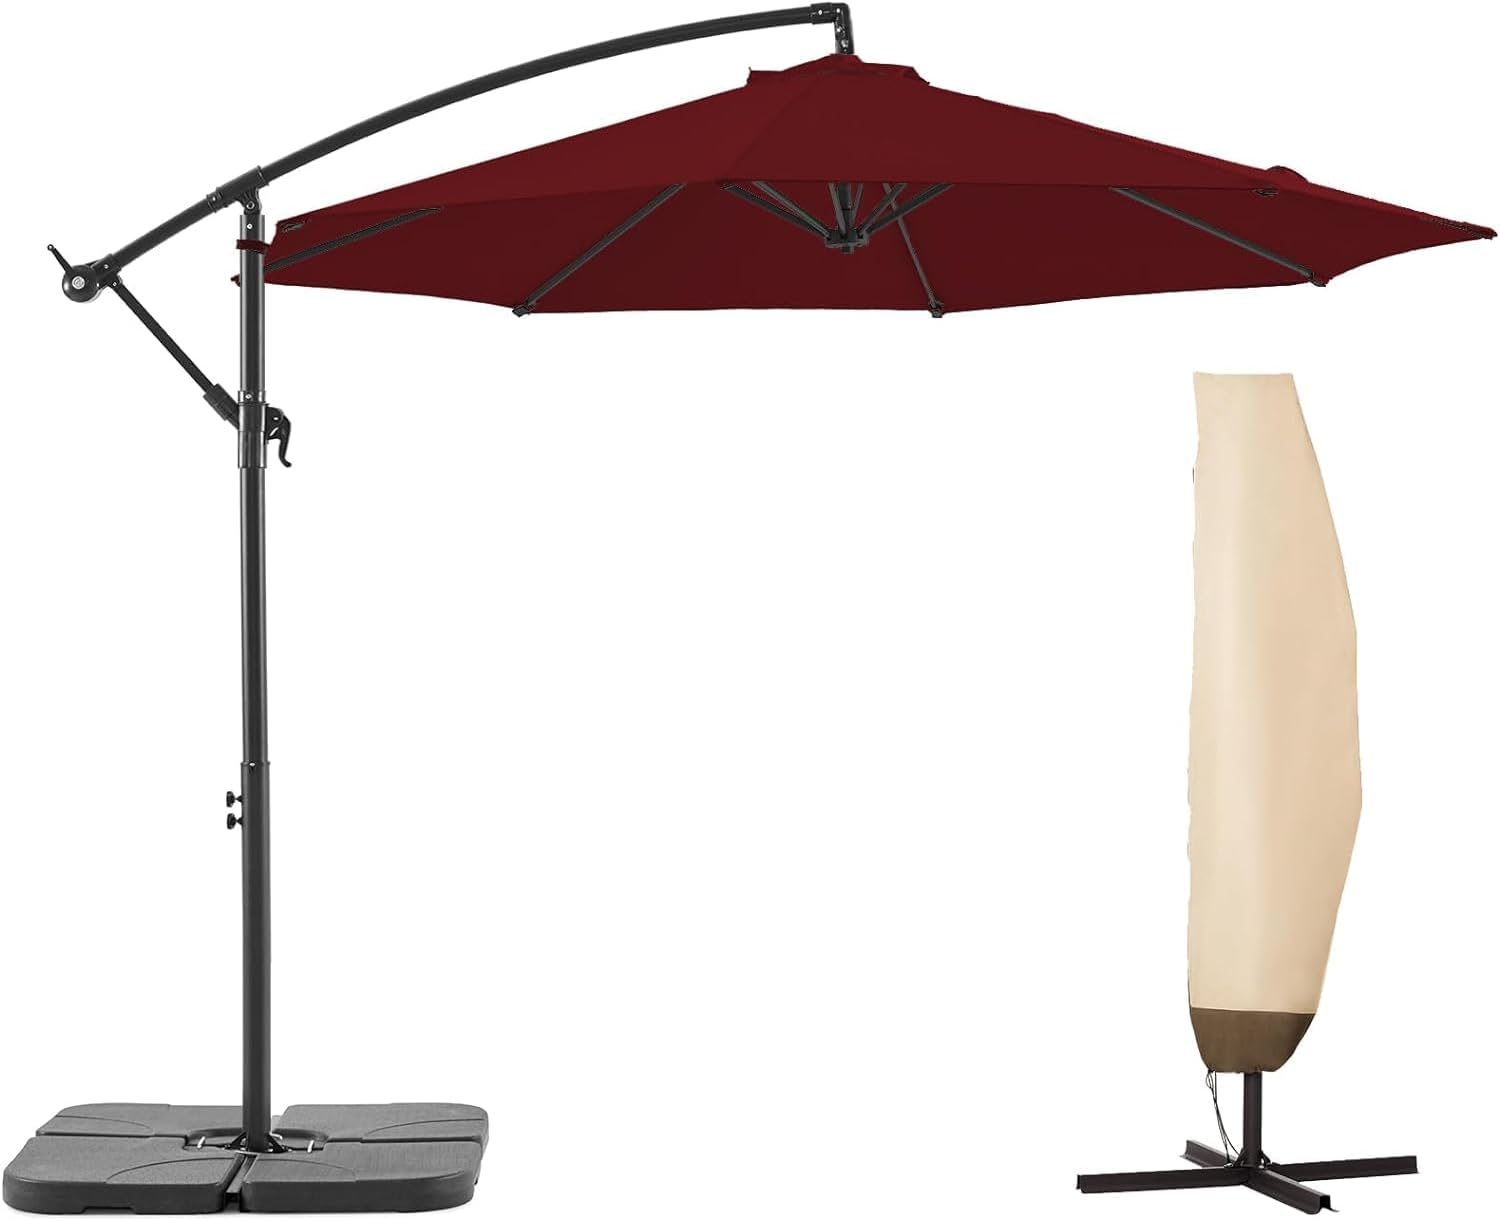 BLUU BANYAN 10 FT Patio Offset Umbrella Cantilever Hanging Umbrellas, 24 Month Fade Resistance & Water-repellent UV Protection, Crank & Cross Base (Burgundy, 10 FT WITH 600D COVER)